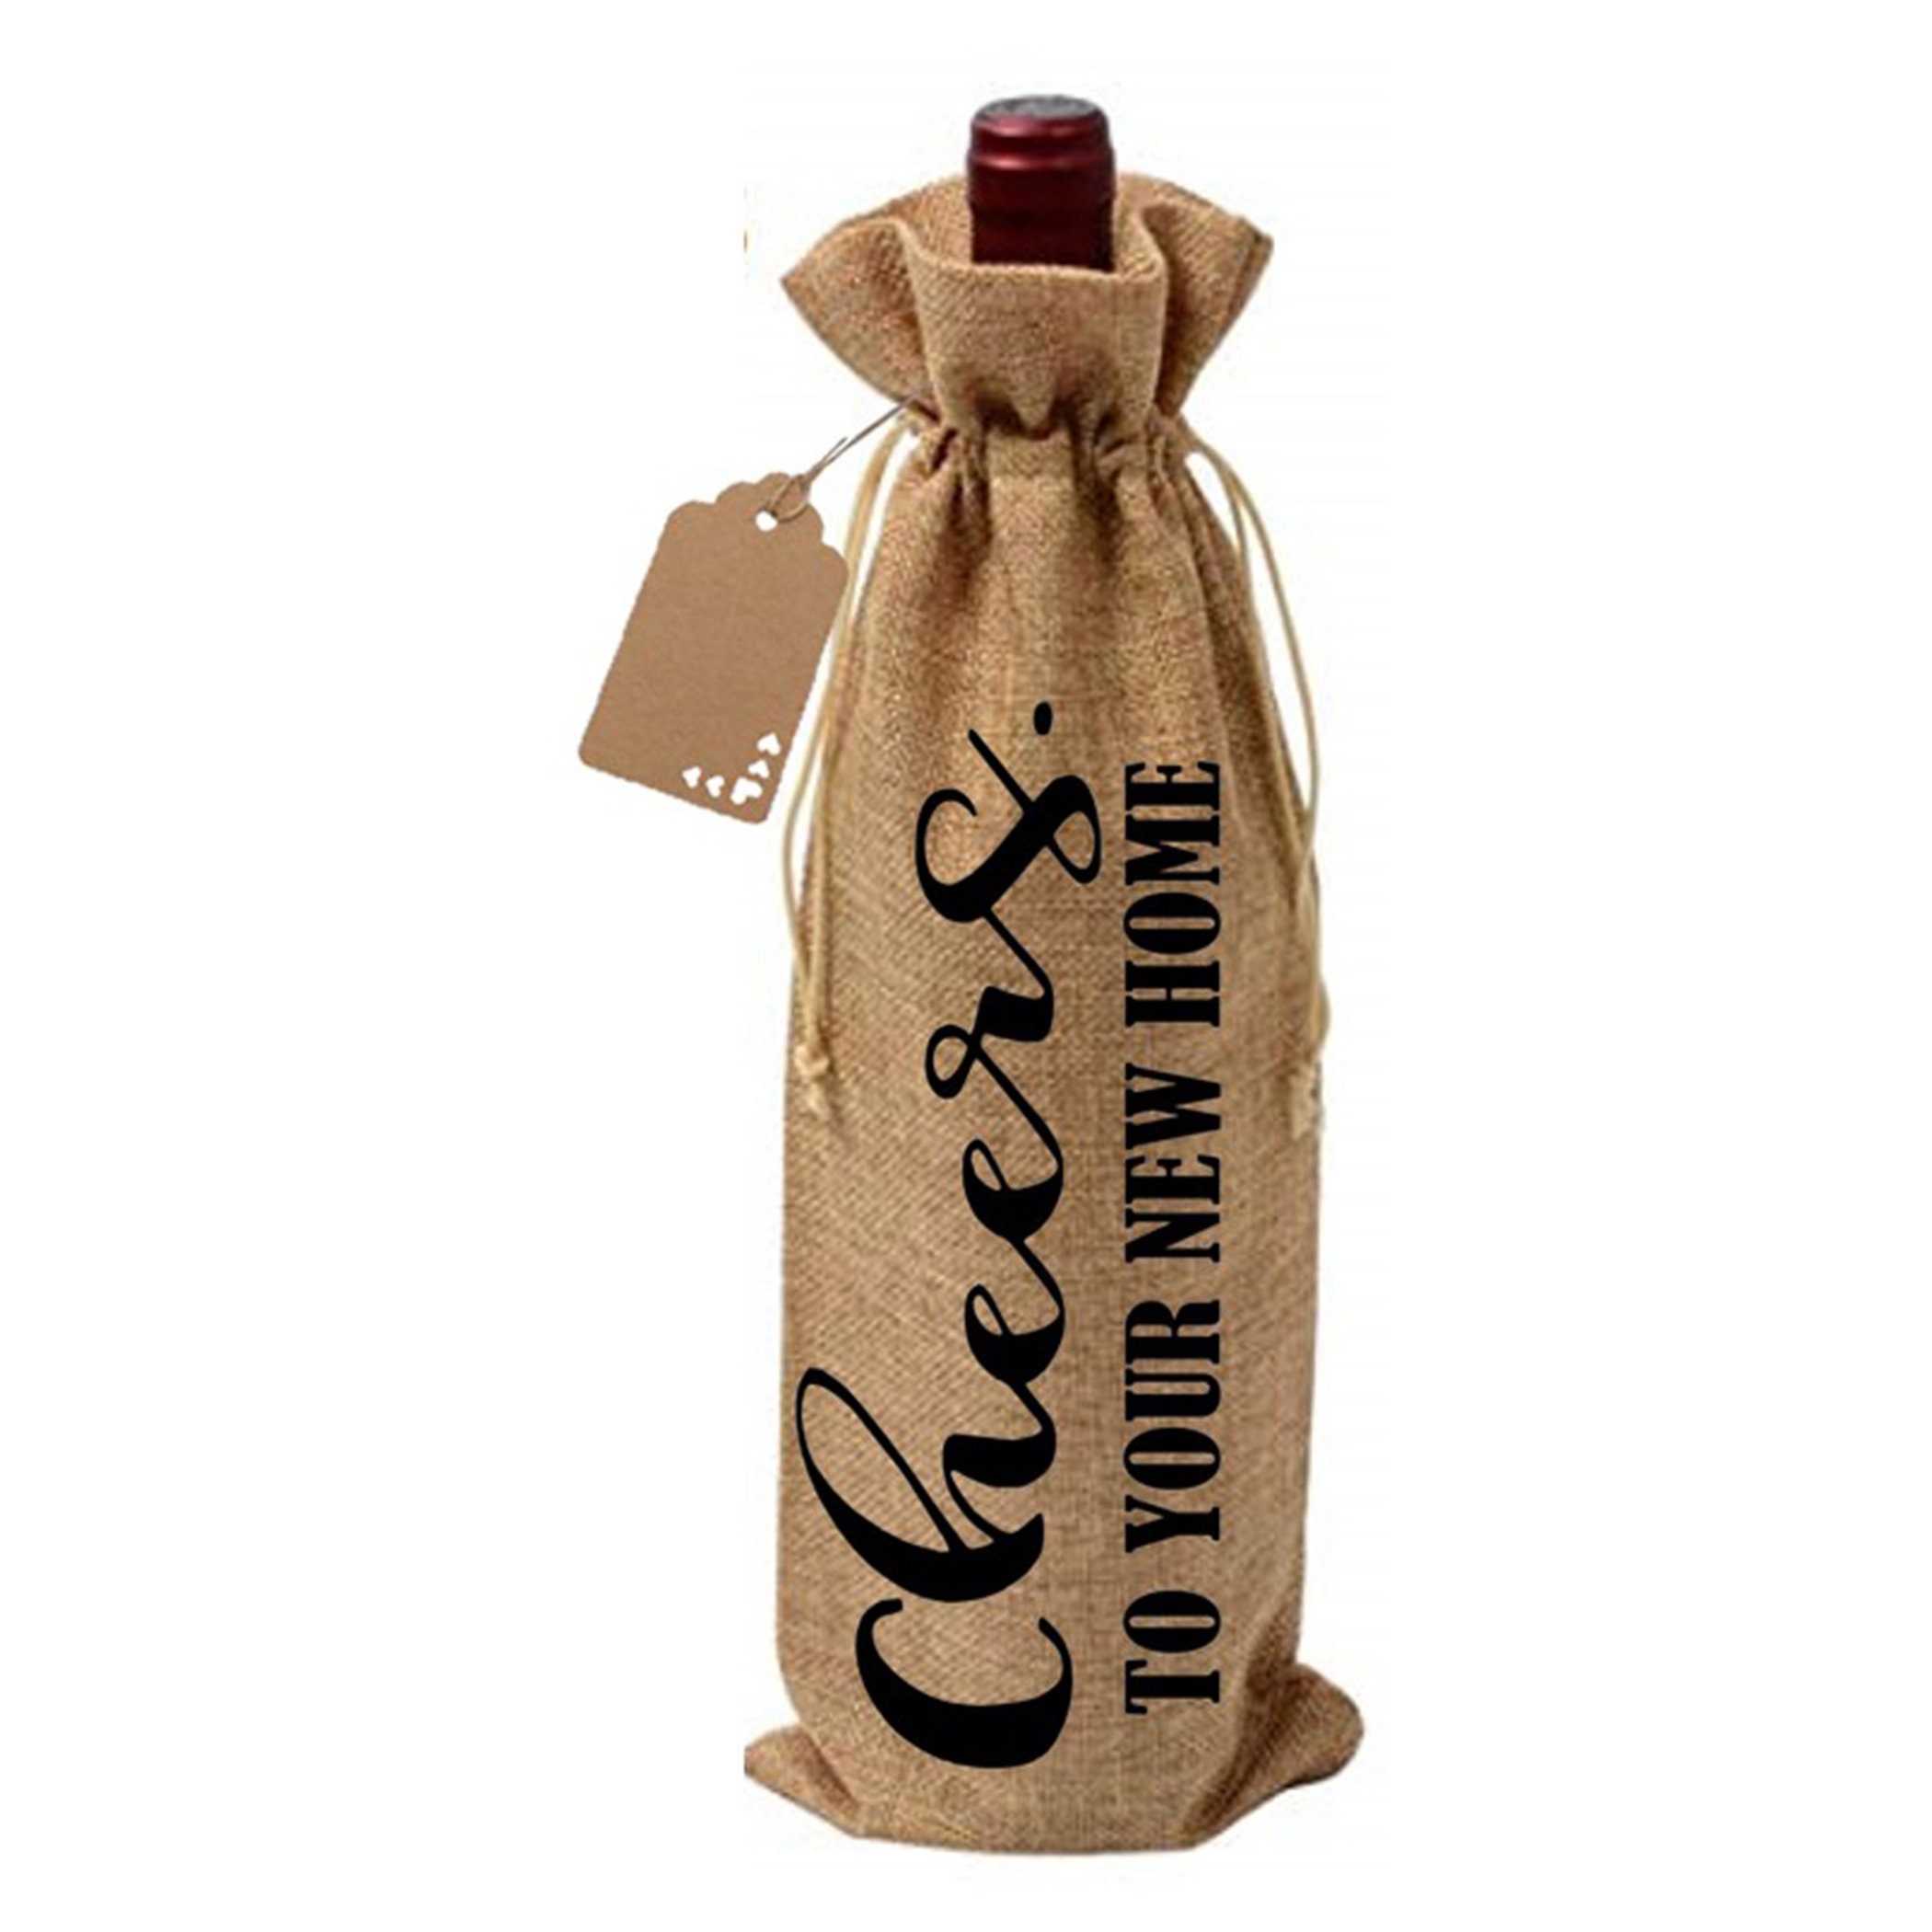  Housewarming Gifts Wine Bag, Thank You Gift for Neighbor,  Housewarming Party Decorations, Best Neighbors Ever Wine Bag, New Home  Owner Gift, Burlap Drawstring Wine Bag (DL092) : Home & Kitchen